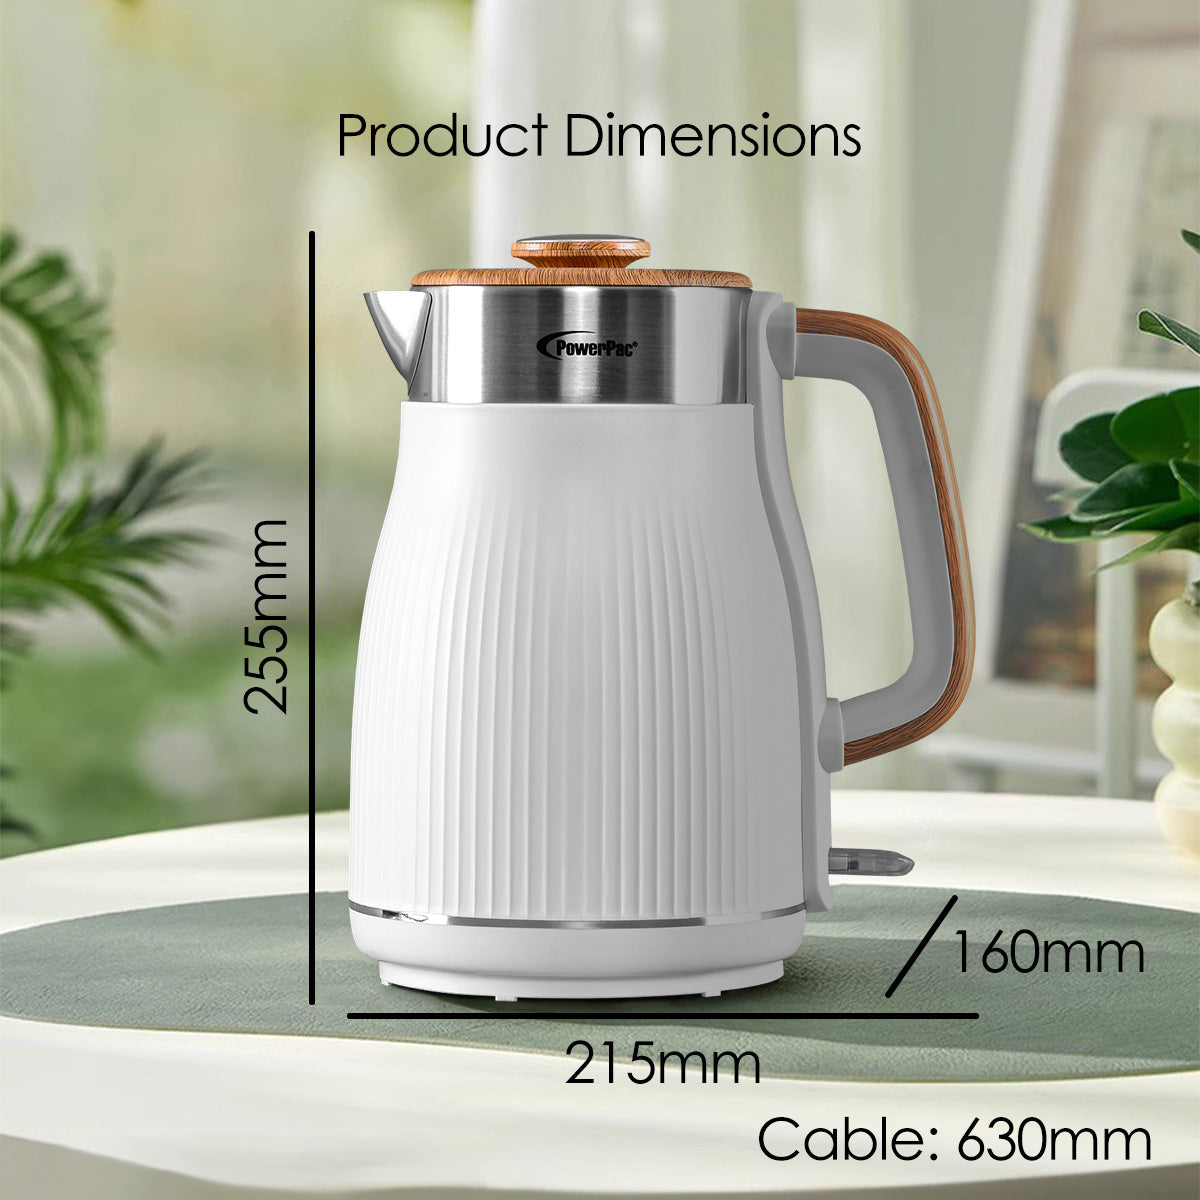 Cordless Kettle Jug, Electric Kettle Jug 1.8L Cool Touch Insulation (PPJ2030WH)